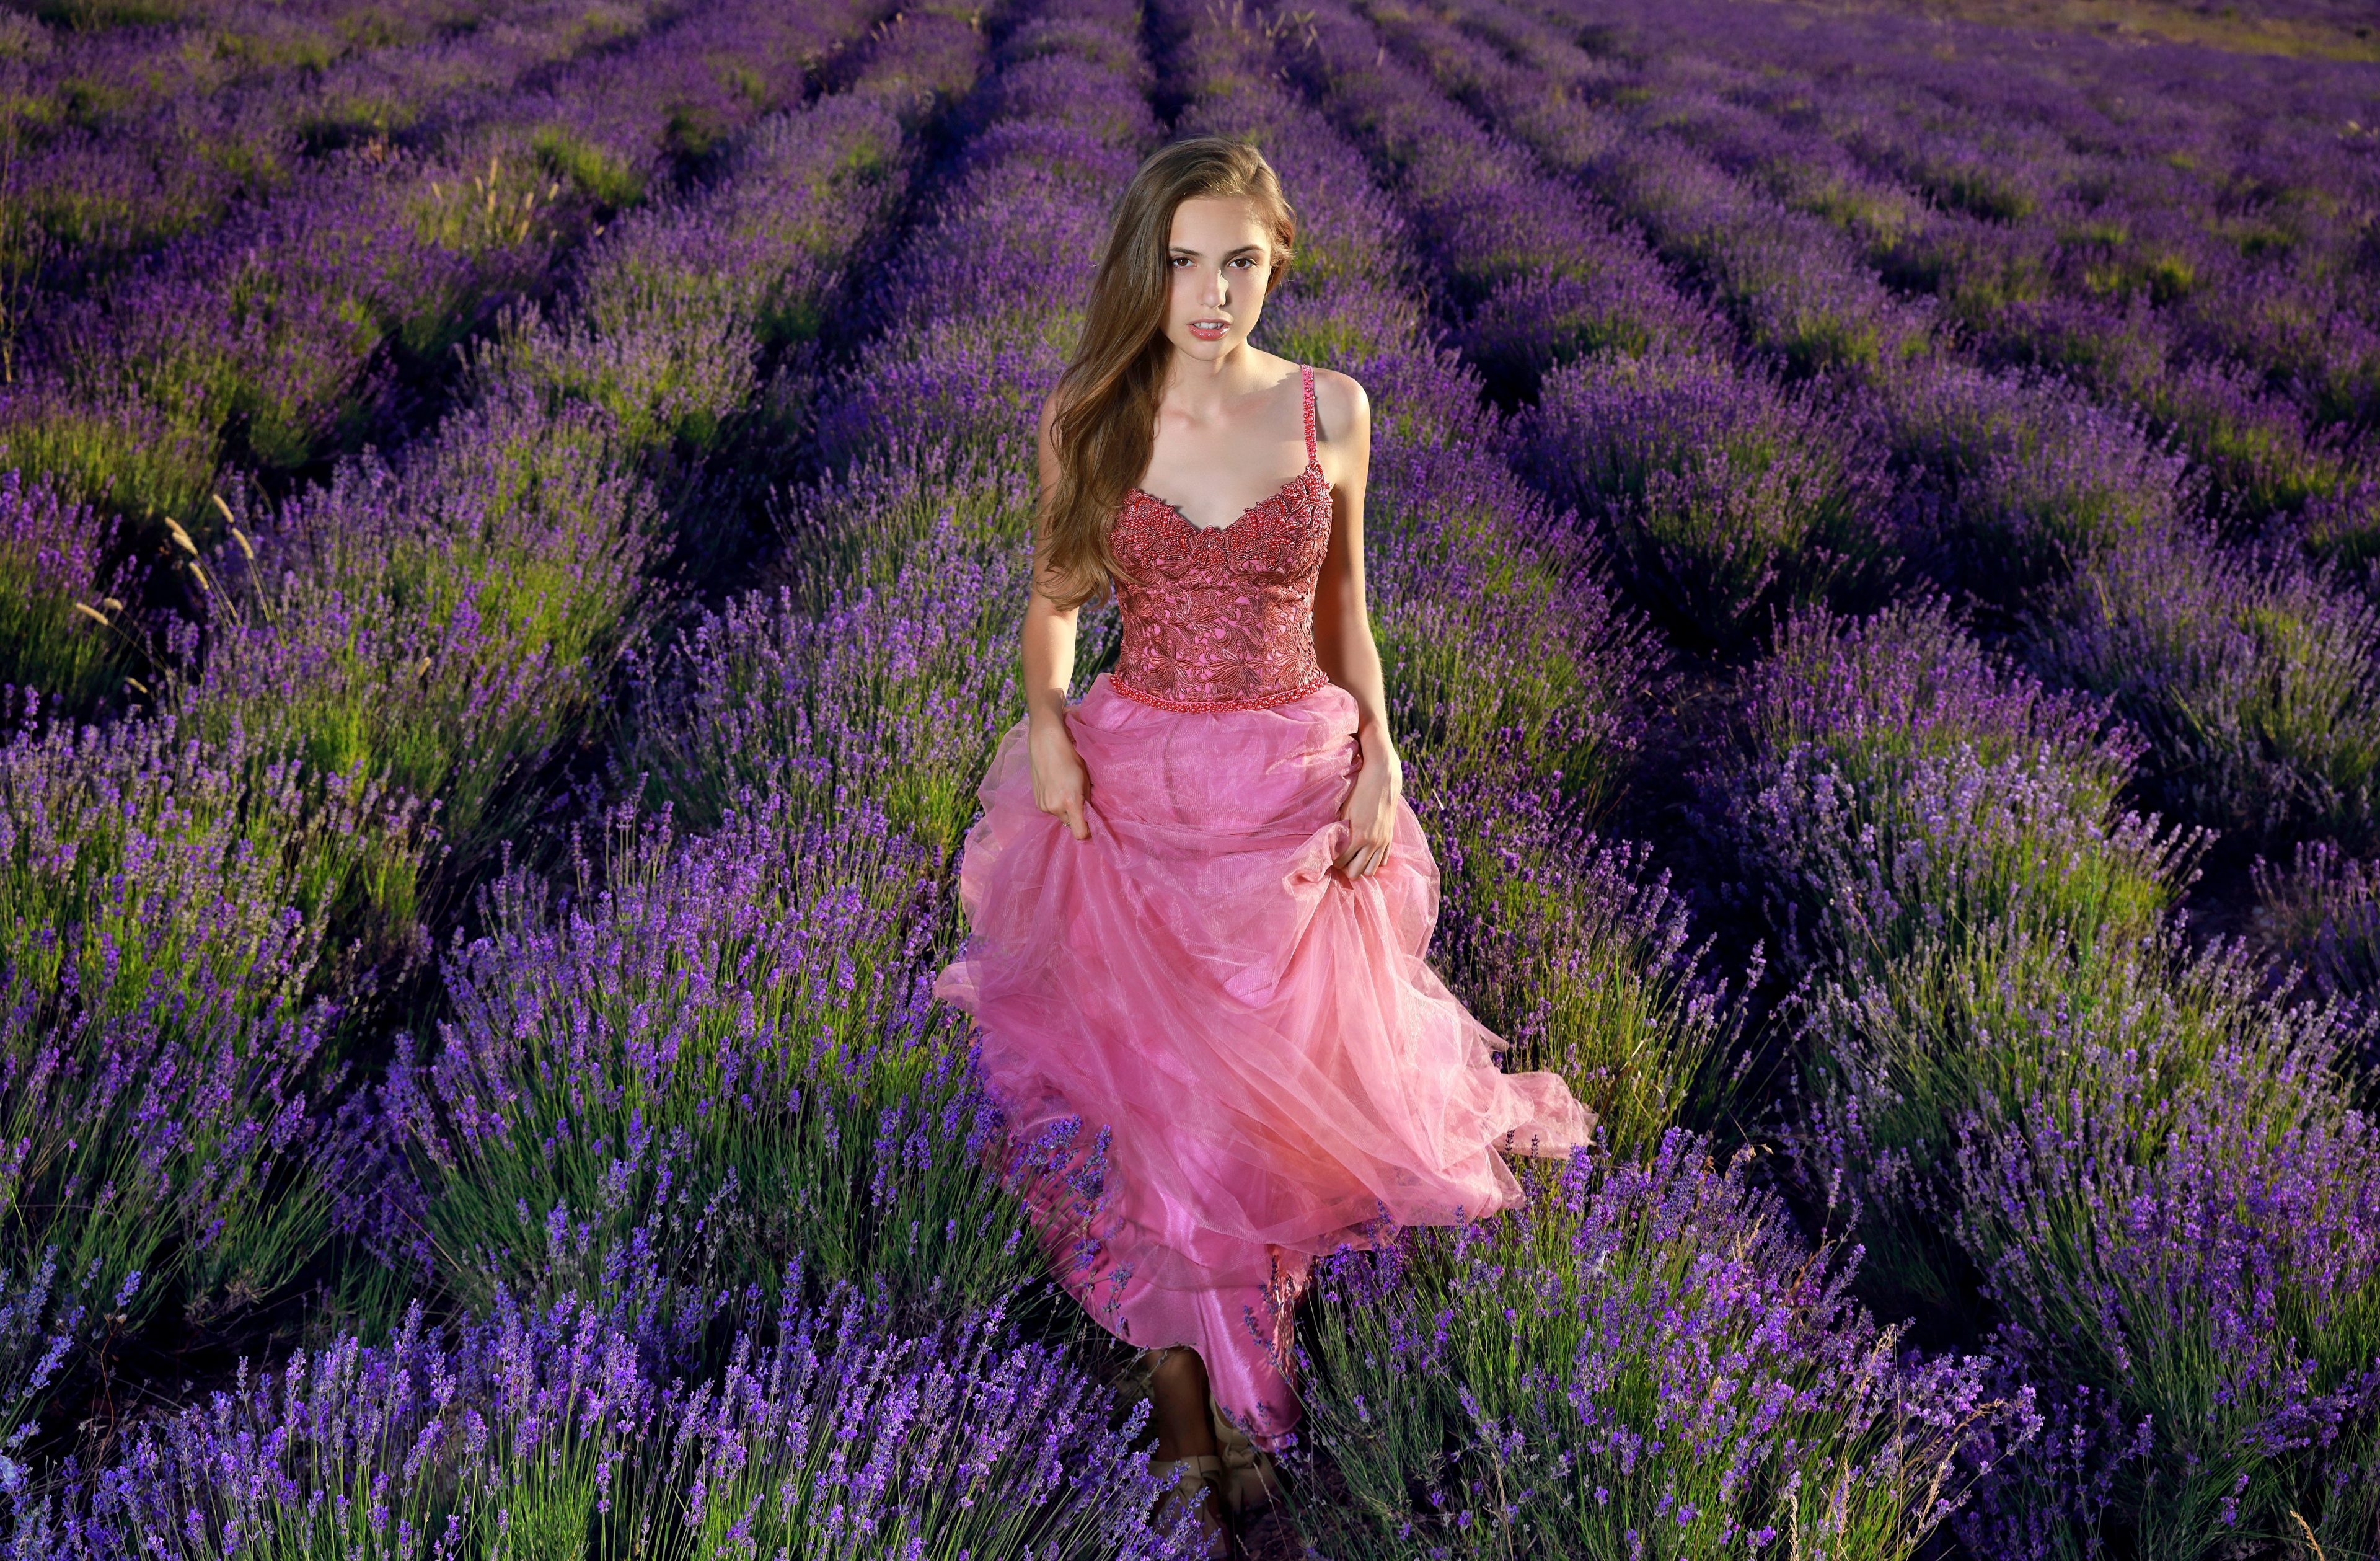 Lavender field girl dress cute k hd girls k wallpapers images backgrounds photos and pictures